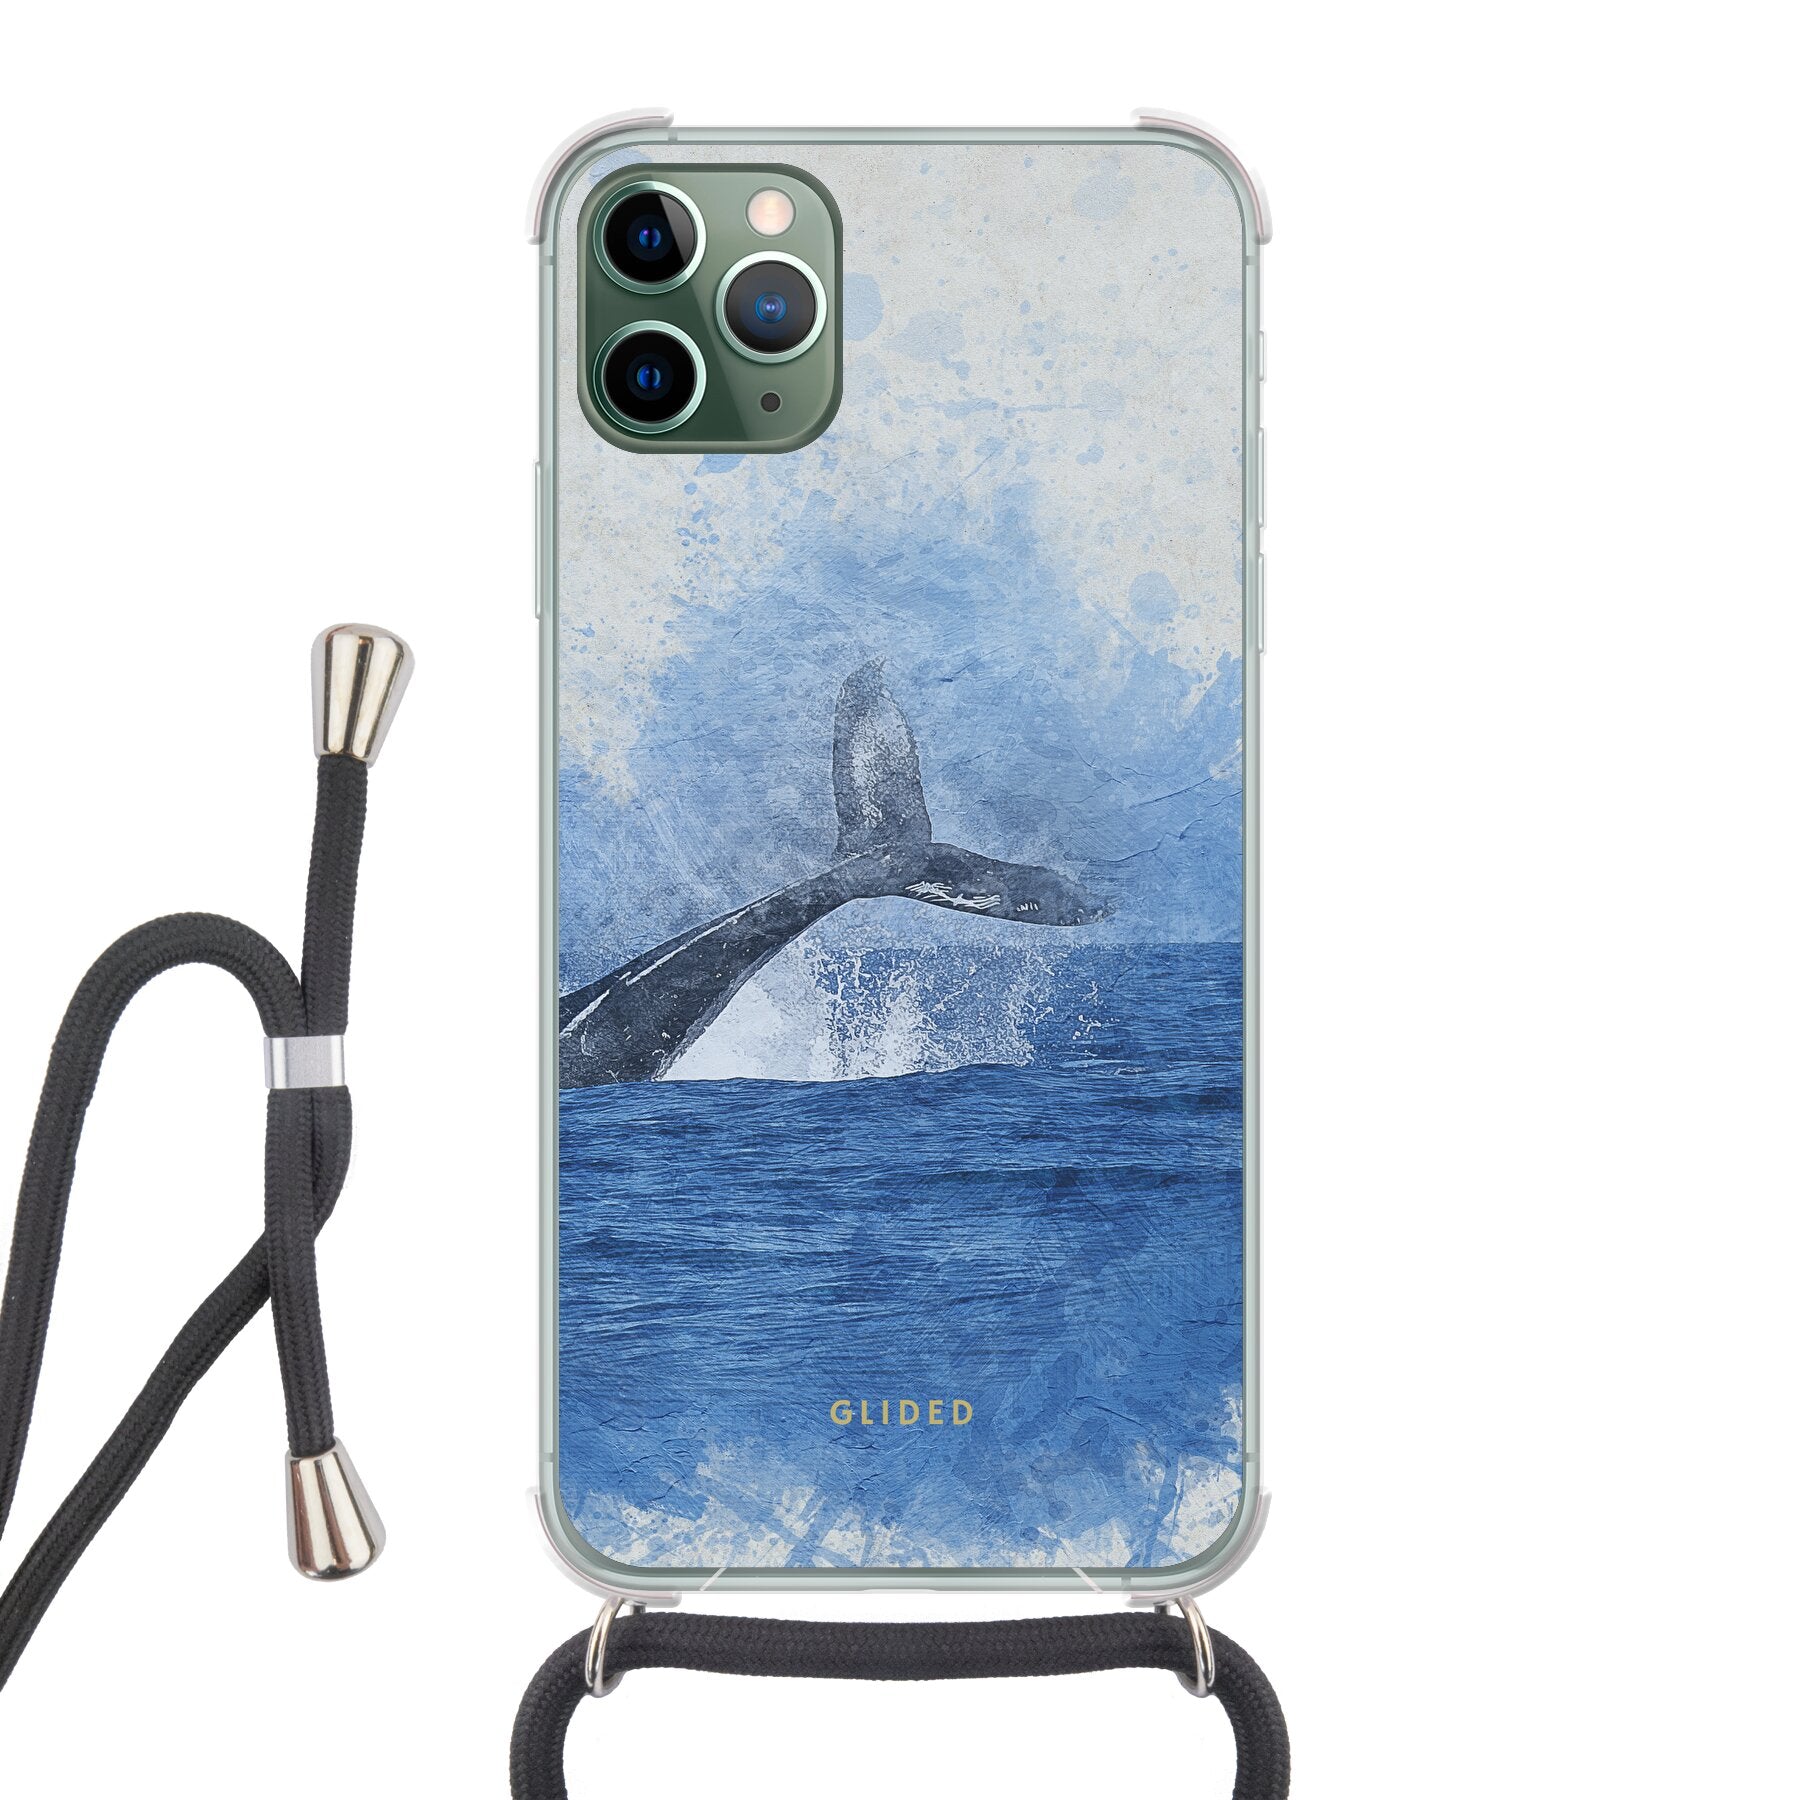 Oceanic - iPhone 11 Pro Max Handyhülle Crossbody case mit Band